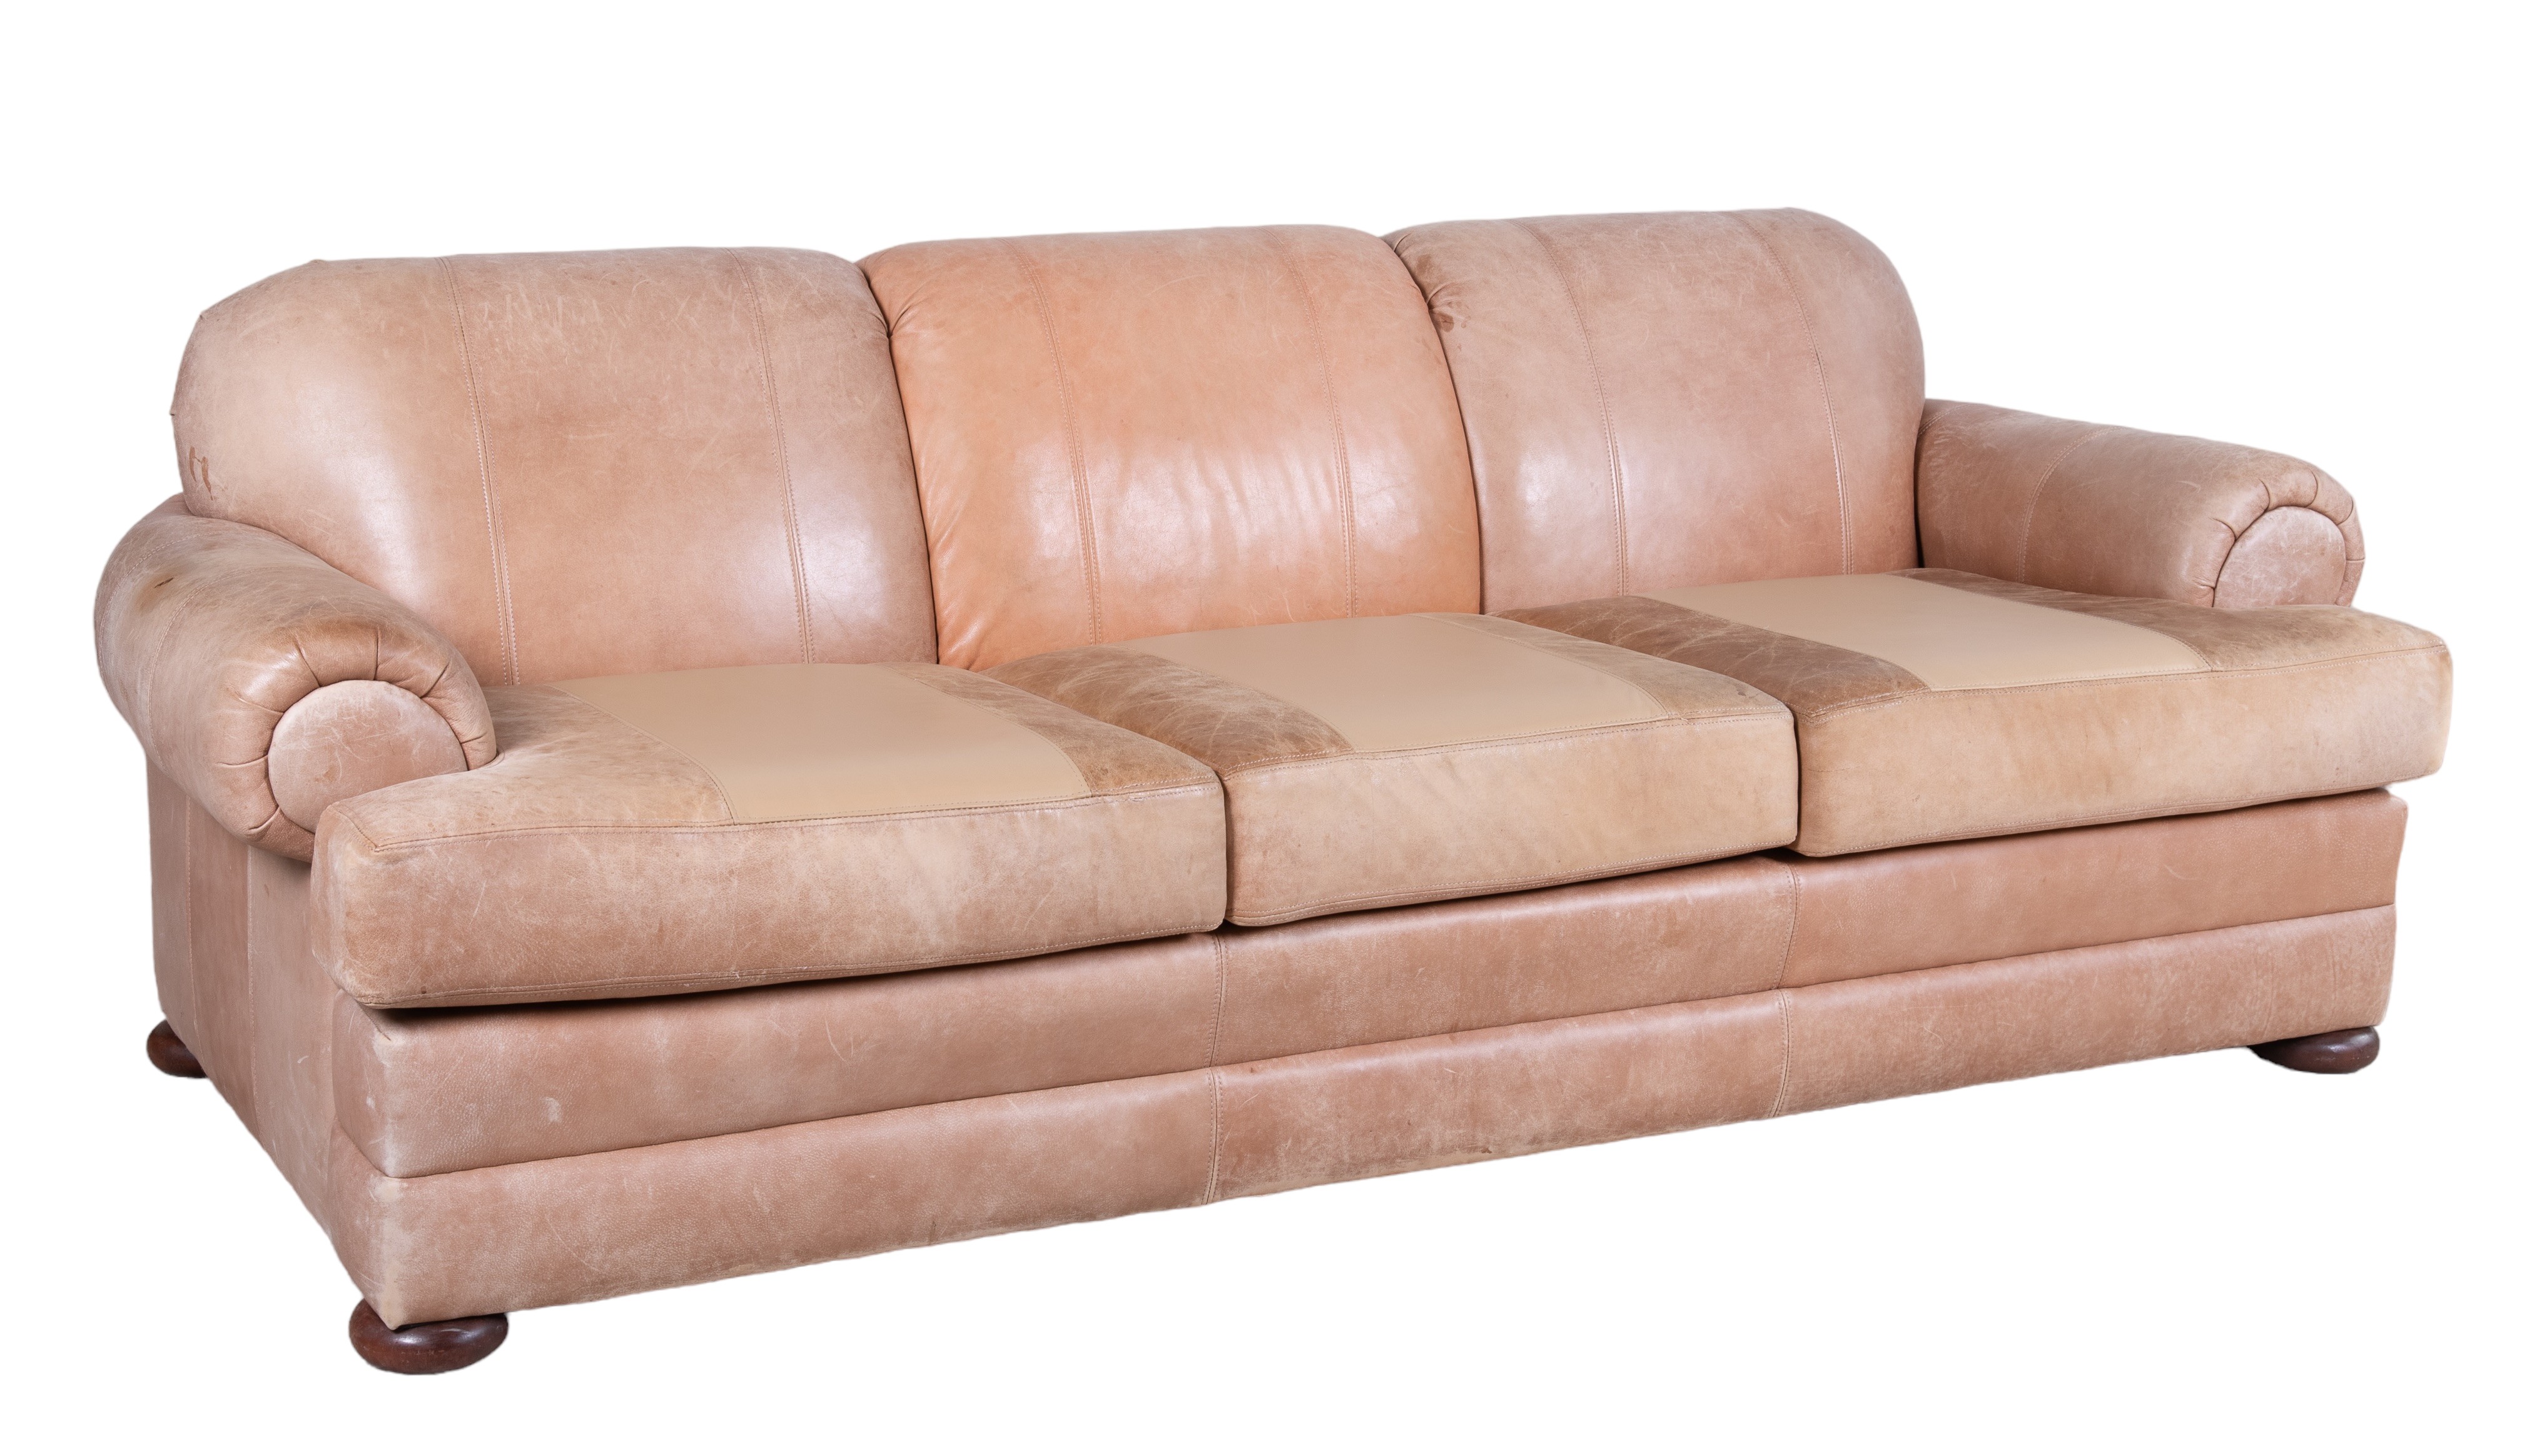 Stitched leather 3-seat sofa, camel